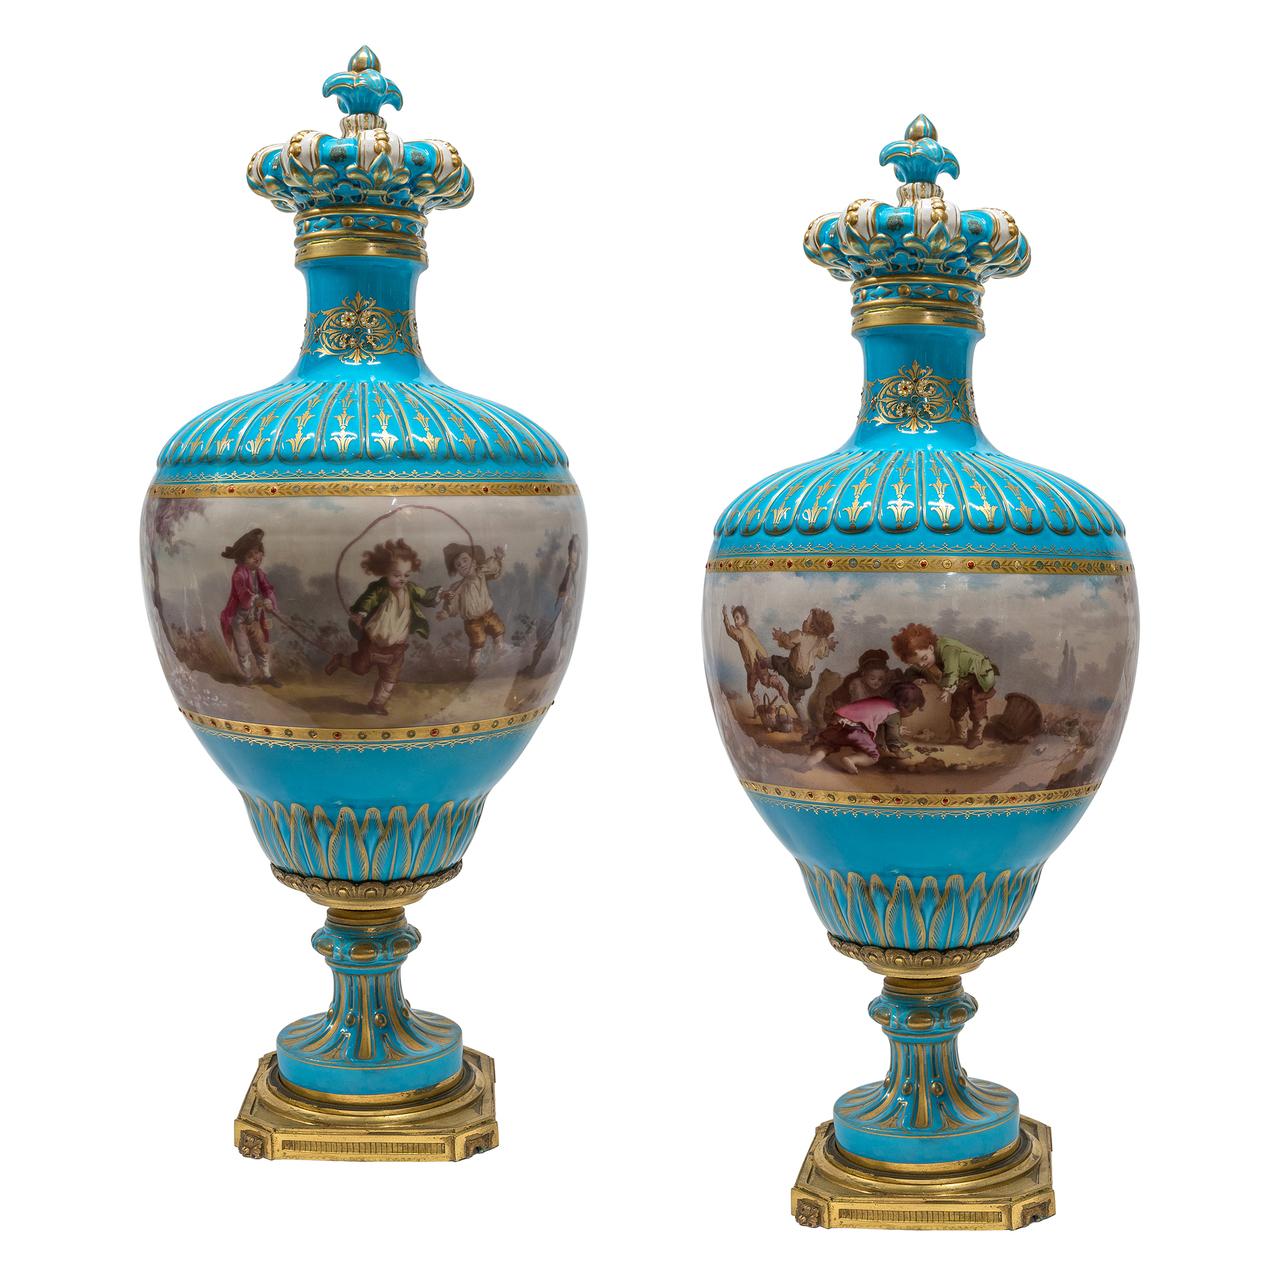 A high quality gilt bronze and Turquoise Sèvres style jeweled Porcelain clock set. The clock surmounted by a covered urn and flanked by lion masks on each side, en suite with a pair of painted turquoise porcelain vases and covers depicting playing.